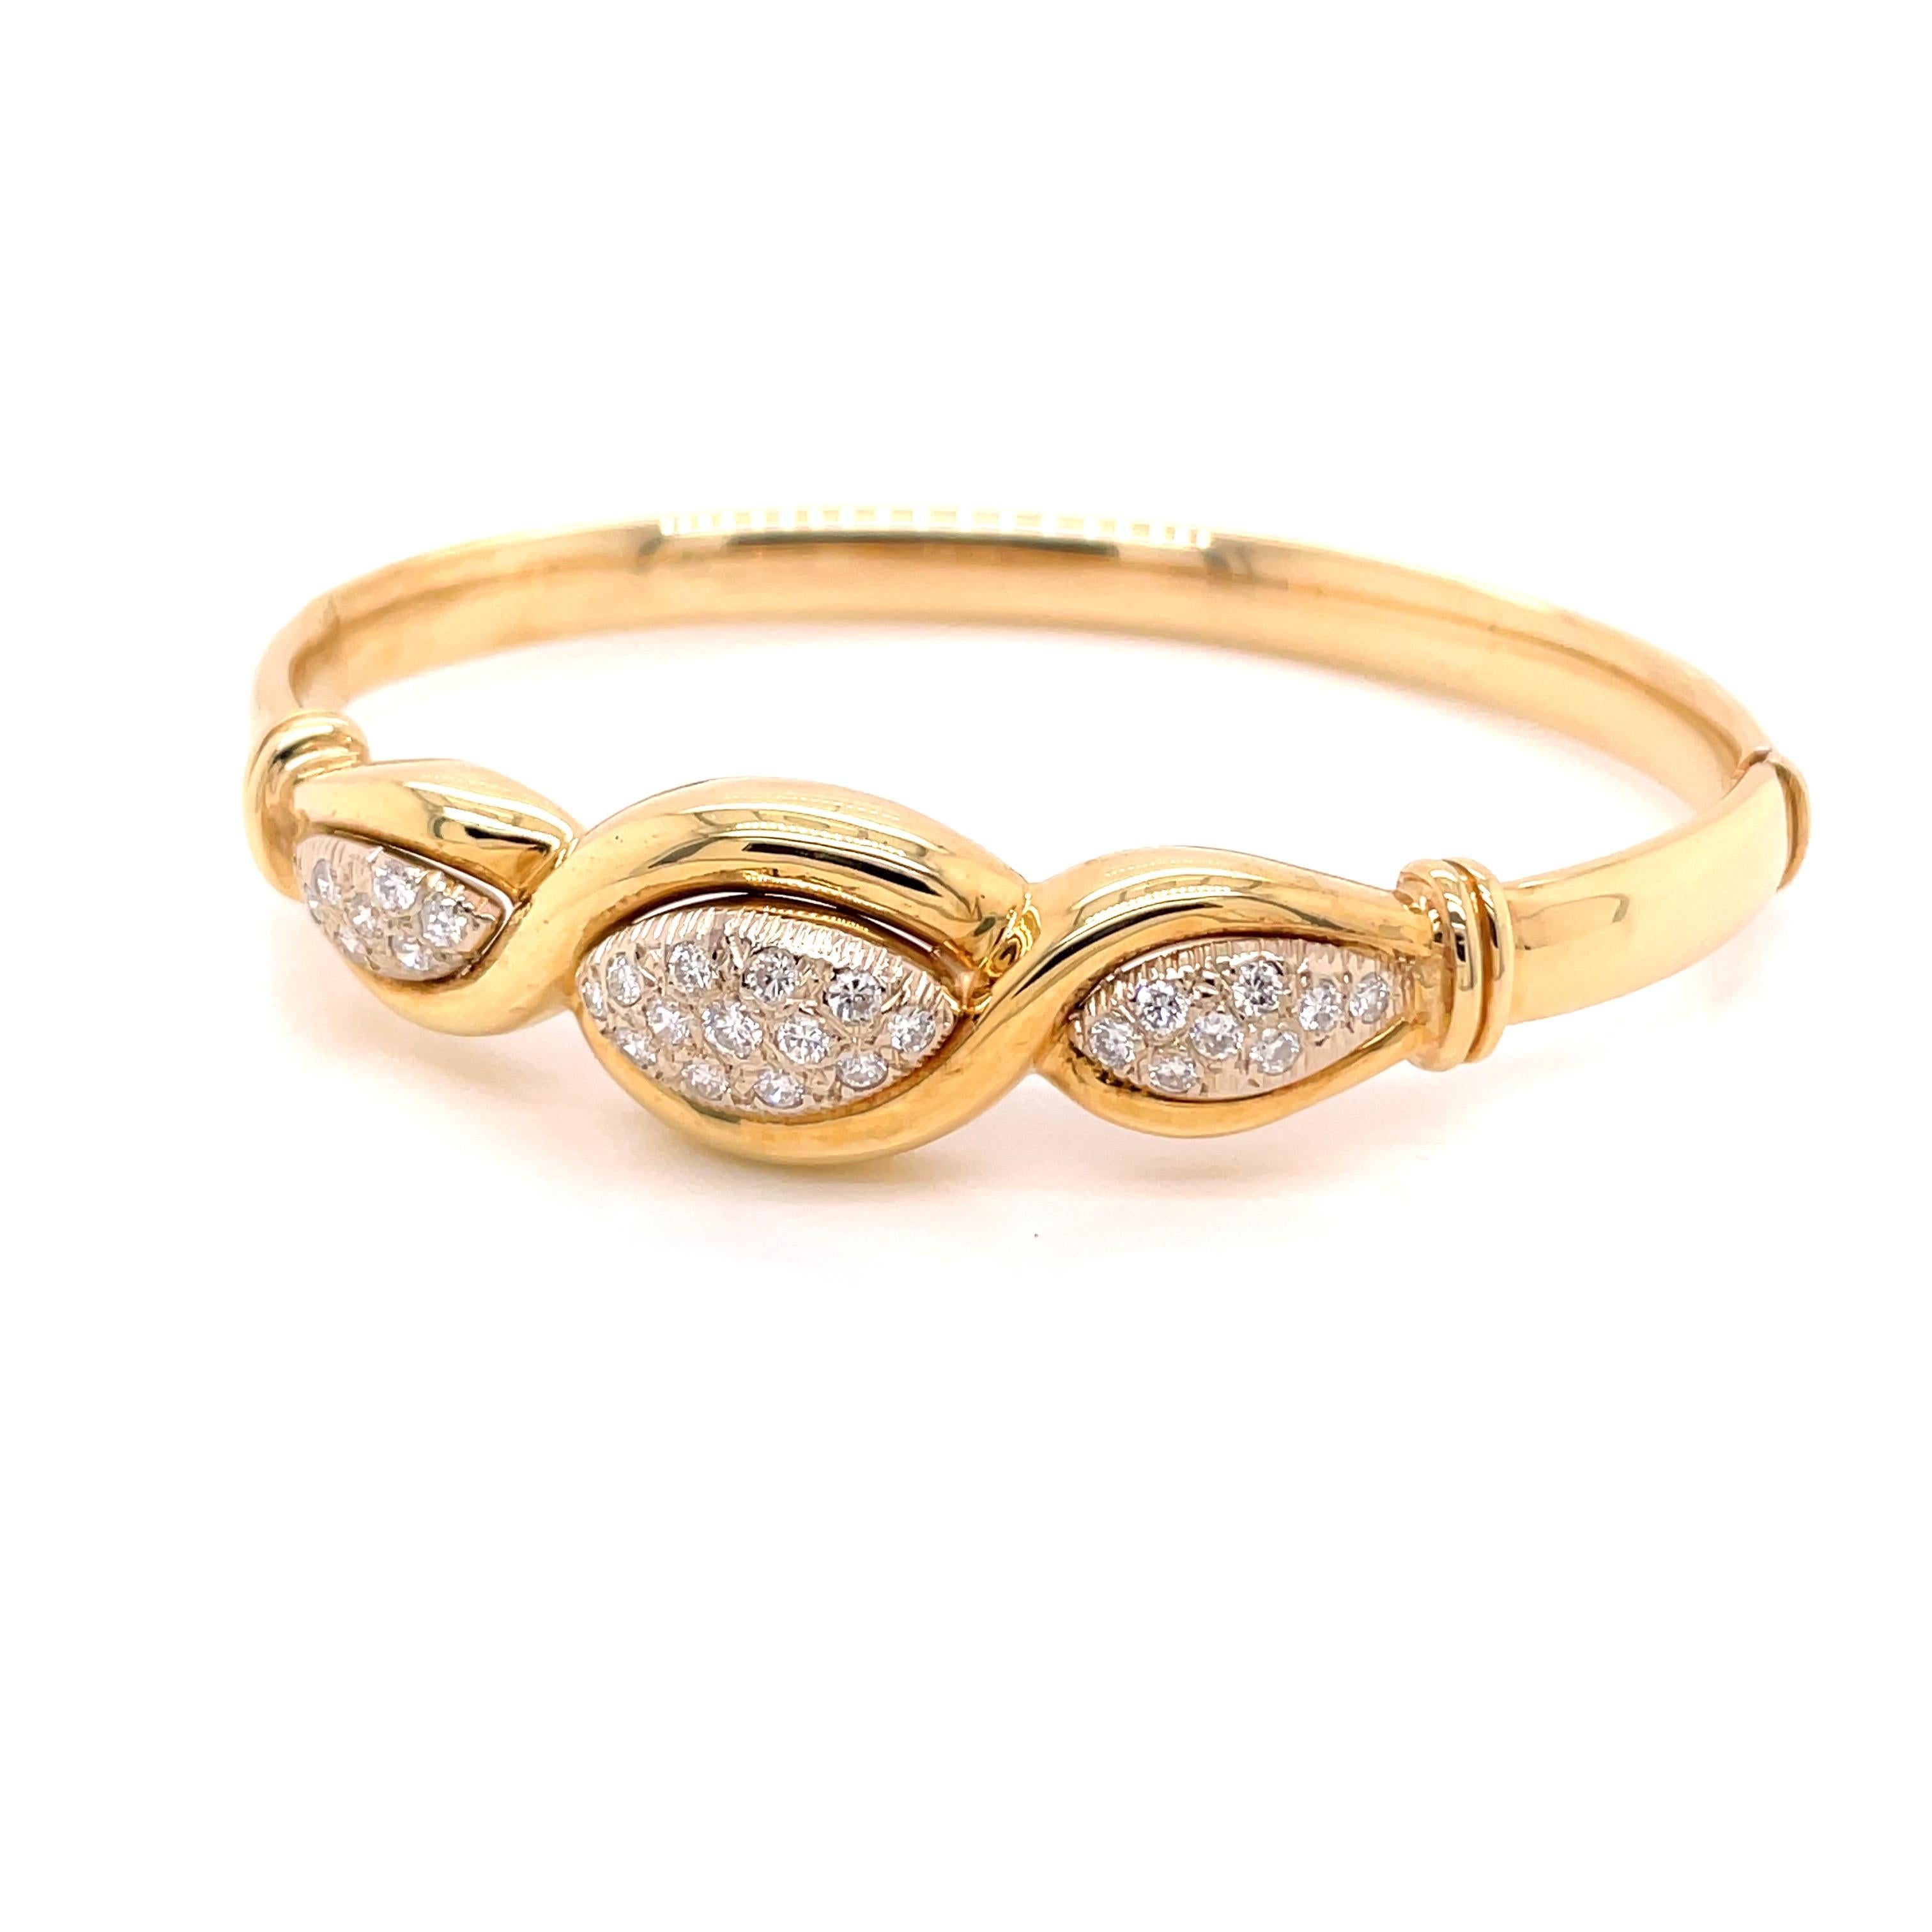 14K Yellow Gold Diamond Bangle Bracelet .82ct - The bangle contains 29 round brilliant diamonds pave set in 3 sections with a total approximate weight of .82ct. The diamonds are G - H color and VS2 - SI1 clarity. The bangle measures 14.4mm wide on